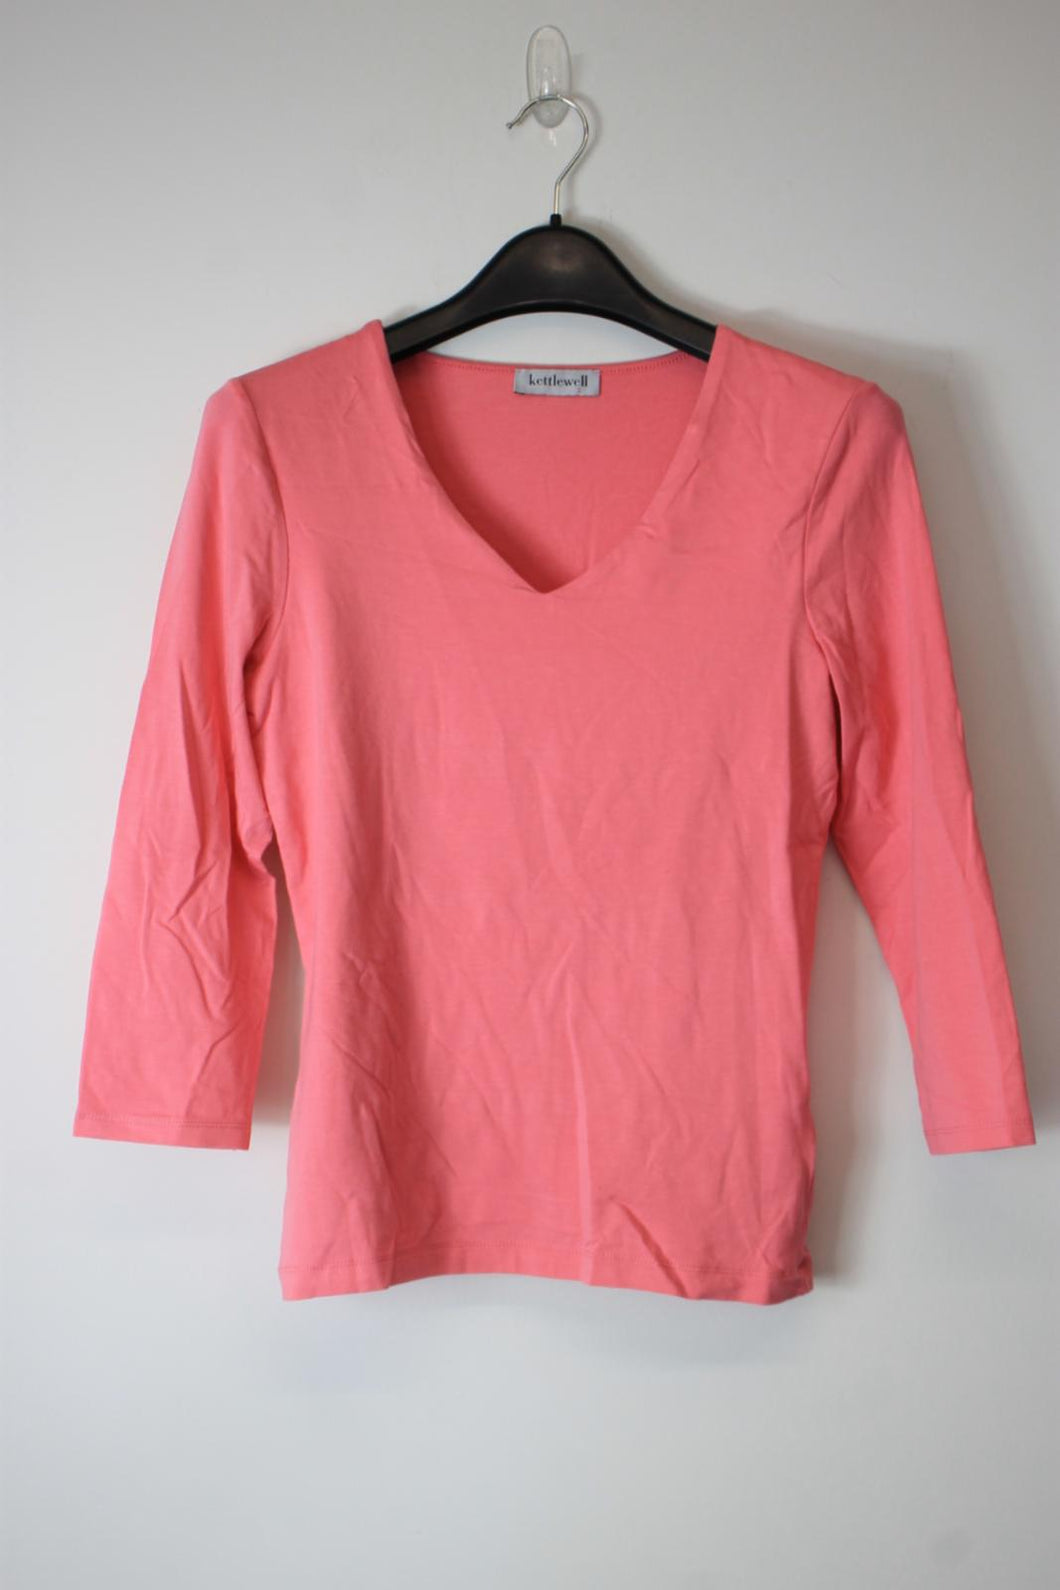 KETTLEWELL Ladies Pink Cotton Long Sleeve V-Neck Top Size S